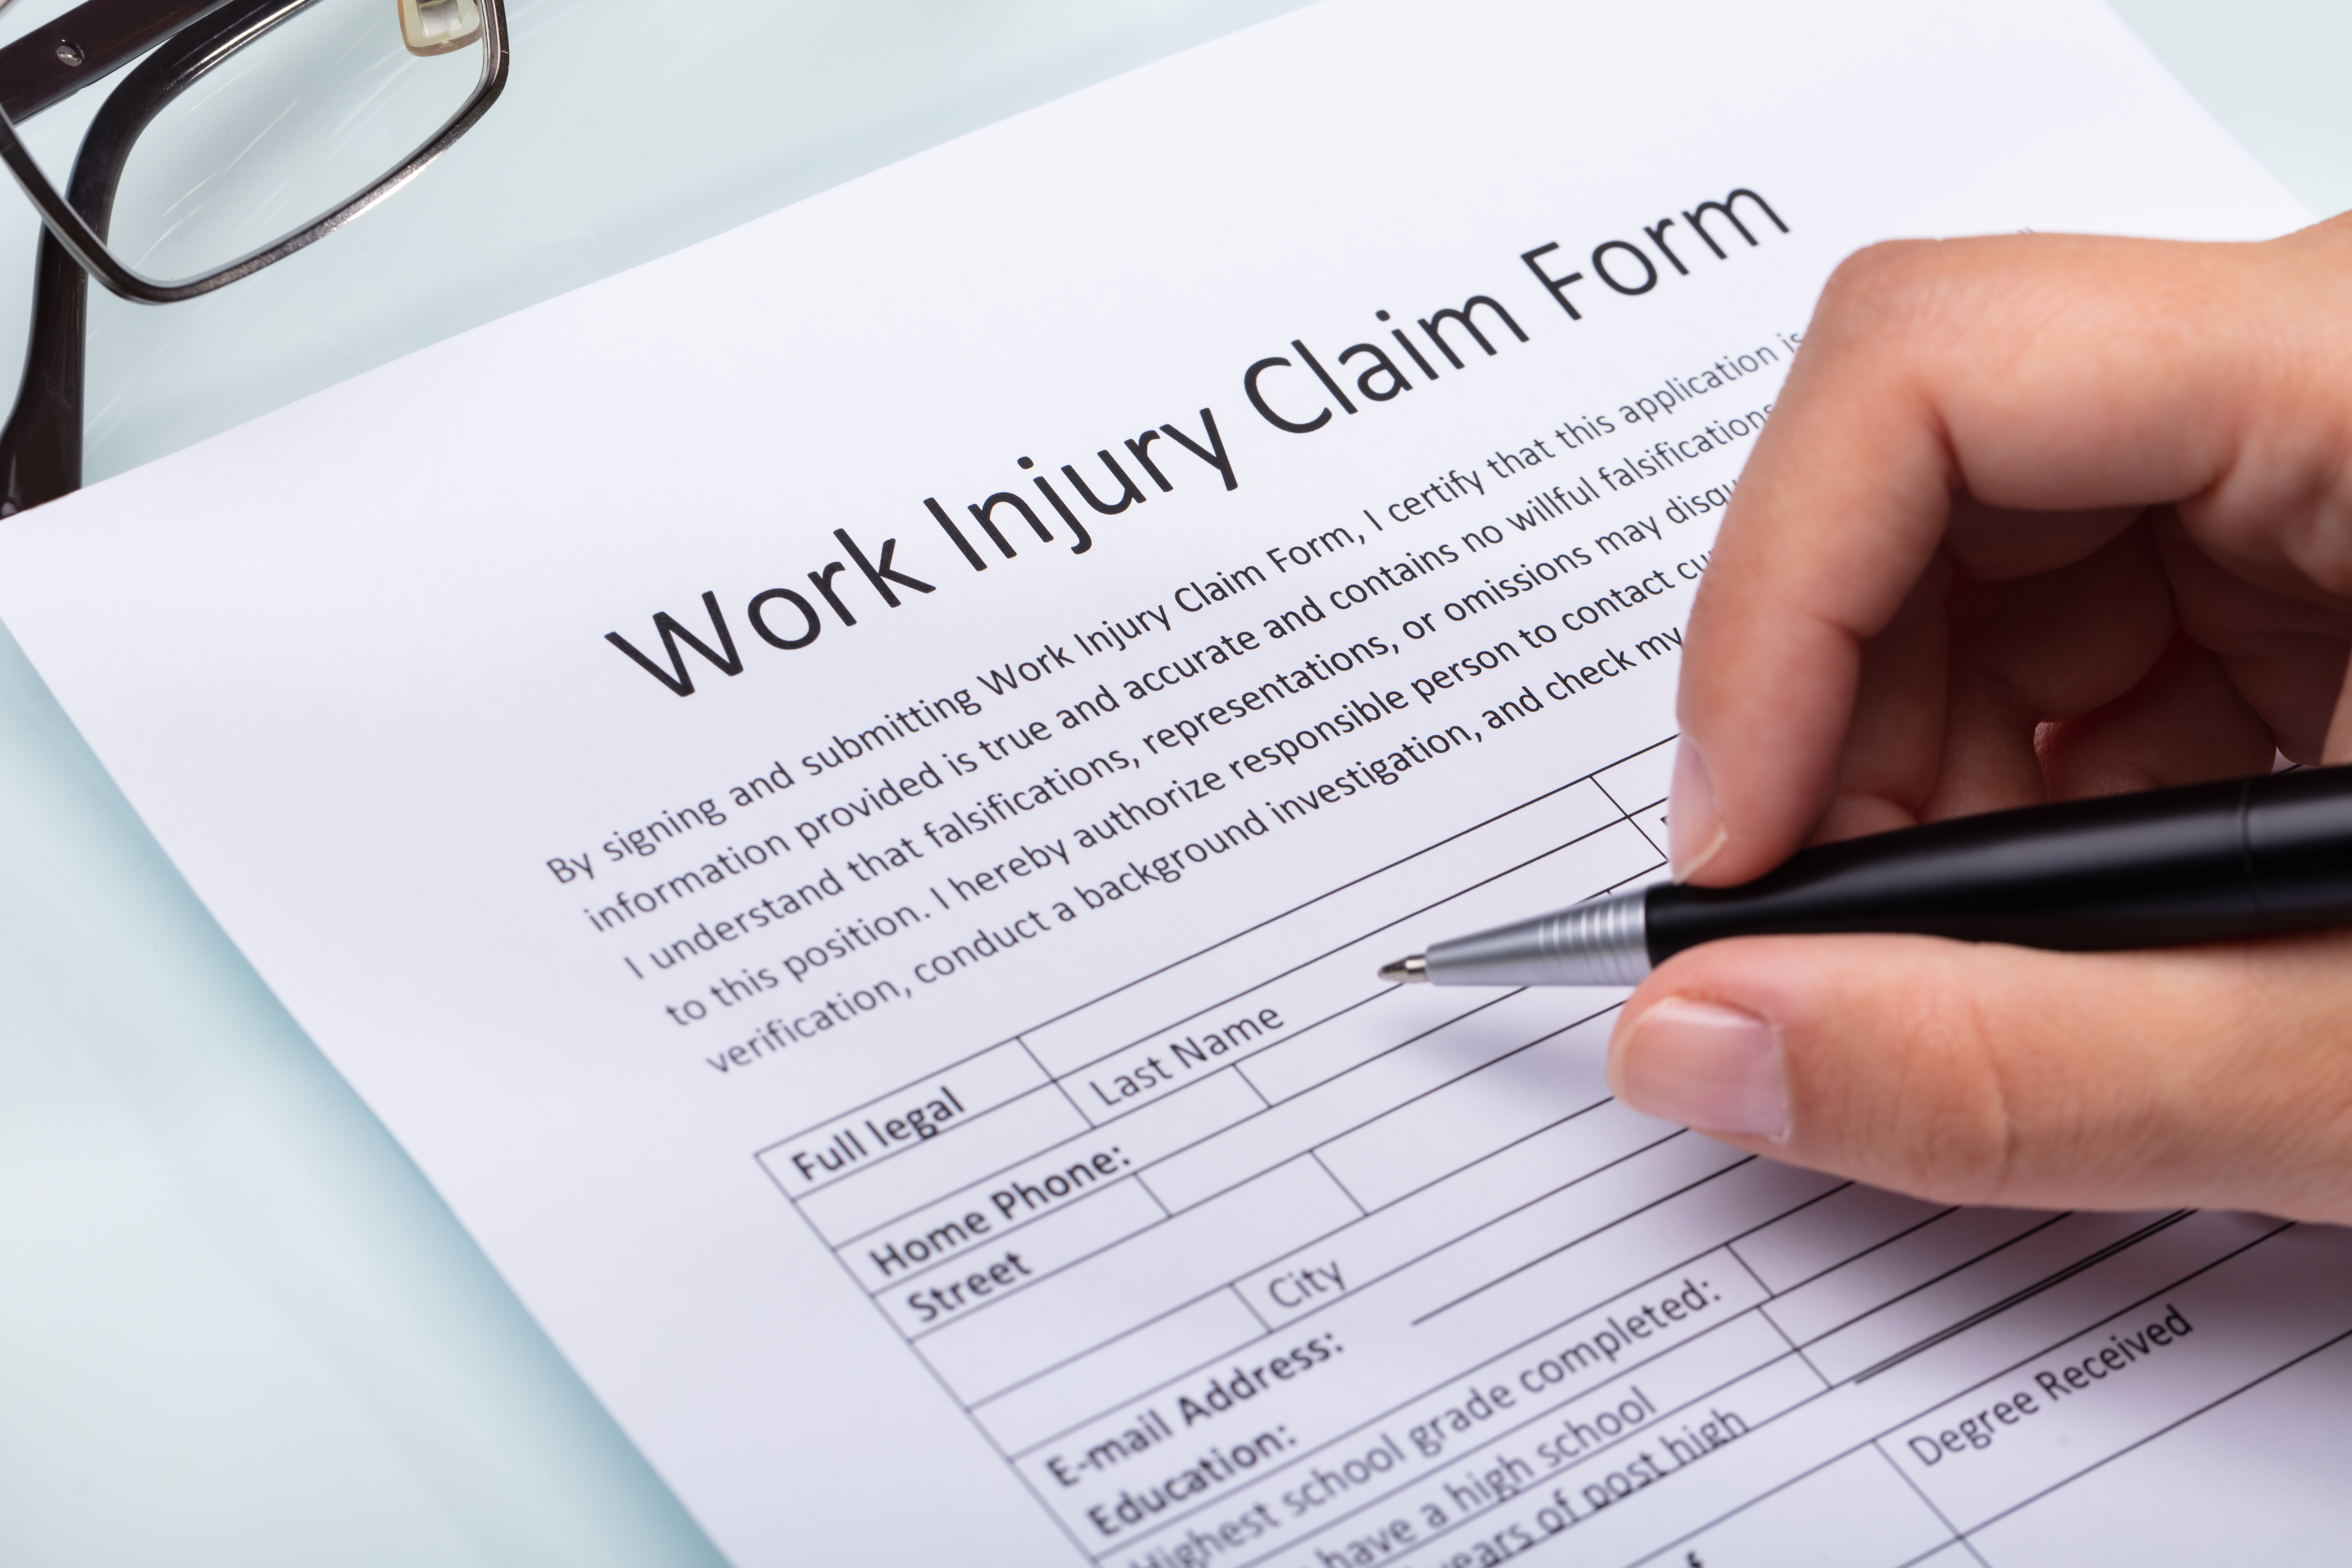 Employee Compensation - Completing A Form